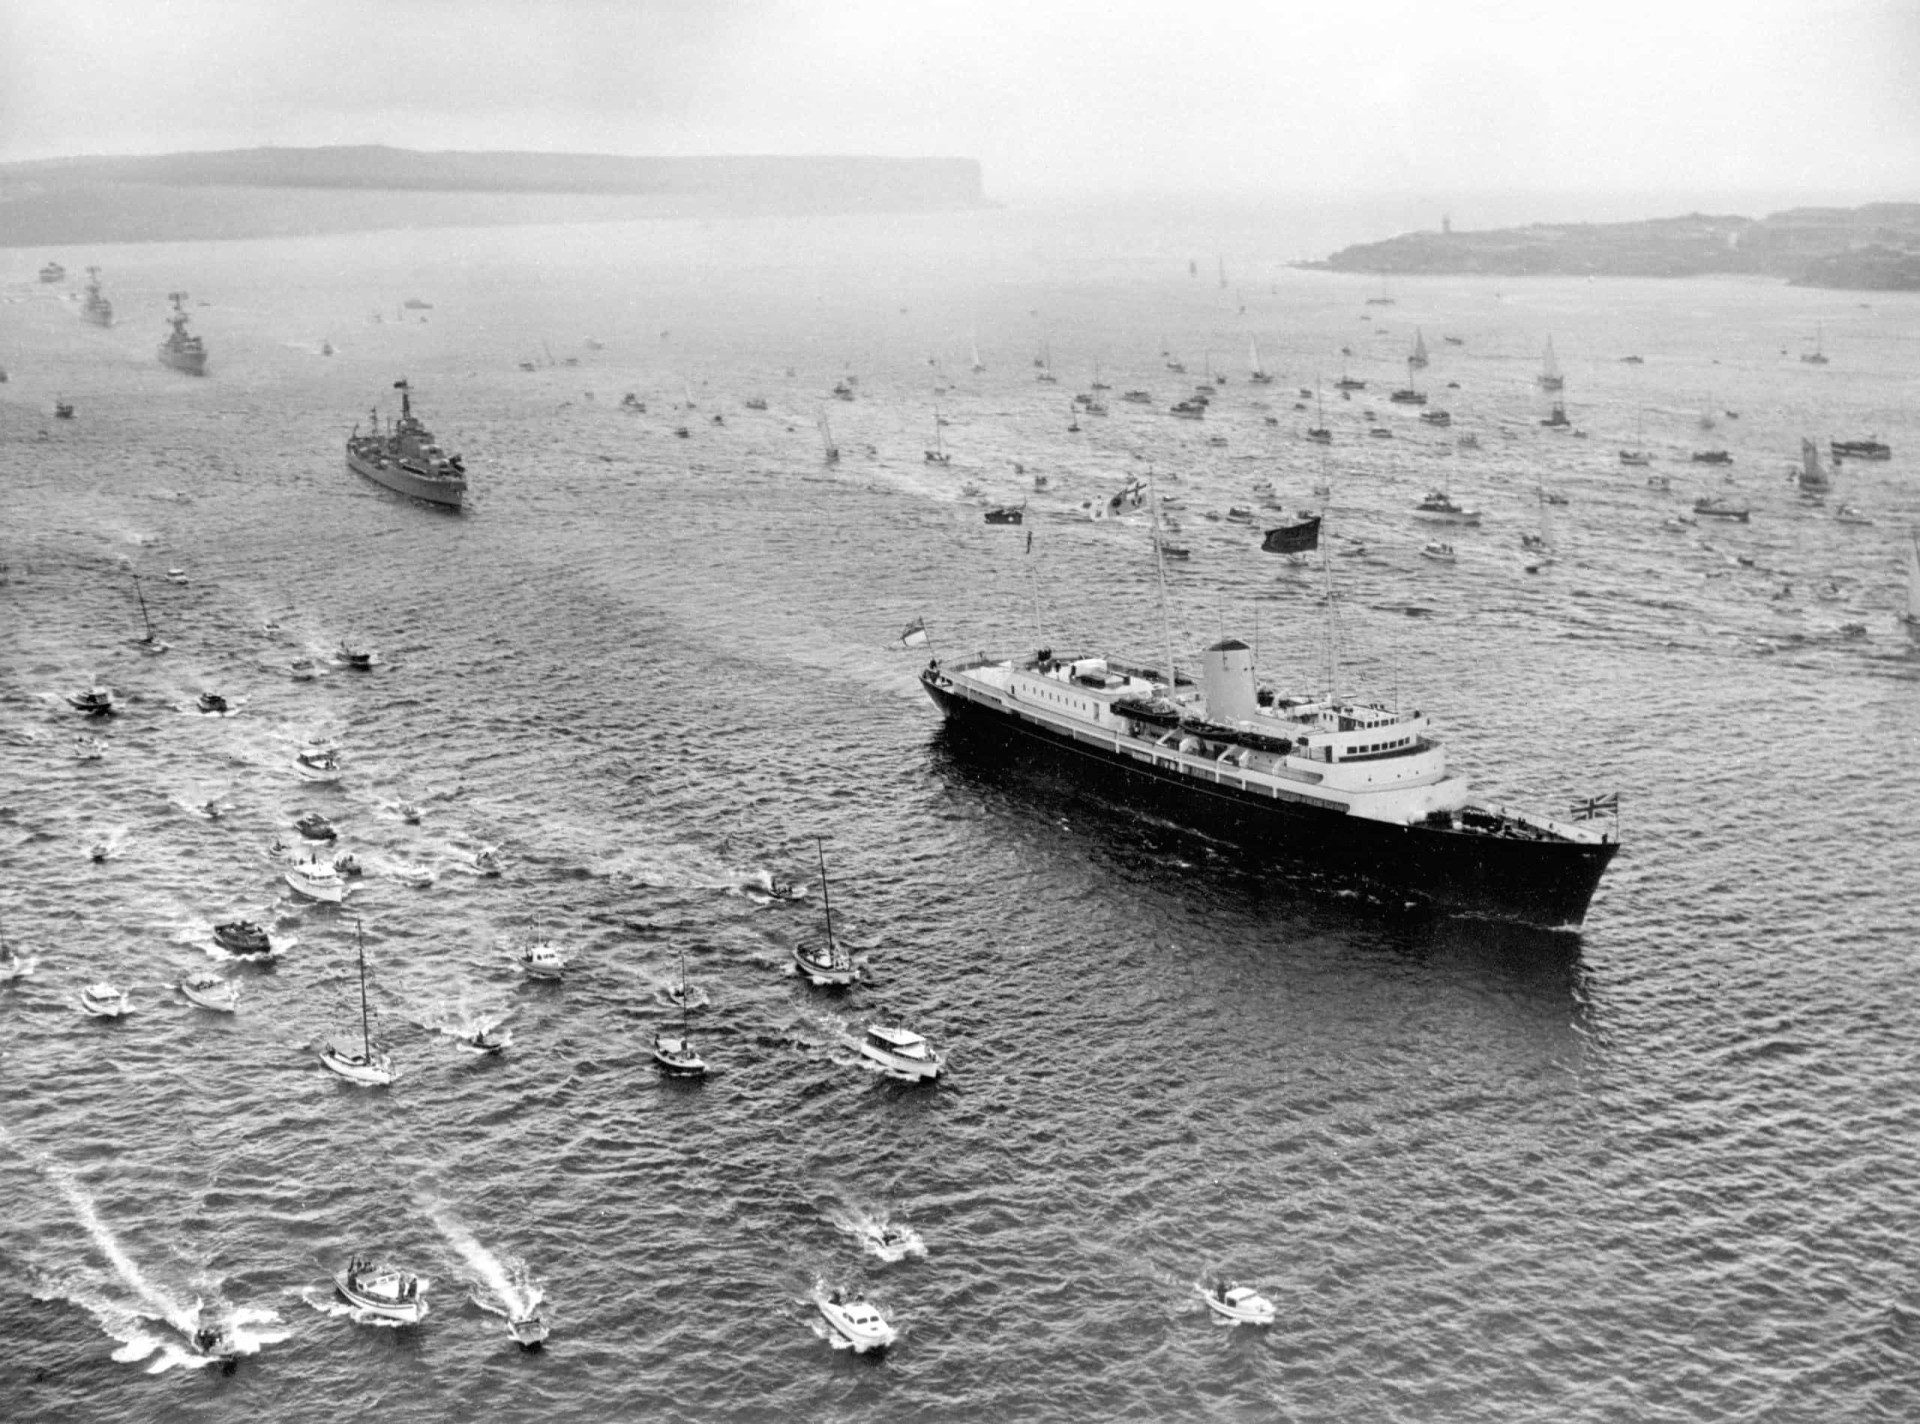 <p>Escorted by an armada of small craft, <em>Britannia</em>, bearing Queen Elizabeth II and the Duke of Edinburgh, arrives off Sydney Heads during their tour of Australia in 1963. Three escorting destroyers of the Royal Australian Navy follow in her wake.</p><p>You may also like:<a href="https://www.starsinsider.com/n/291814?utm_source=msn.com&utm_medium=display&utm_campaign=referral_description&utm_content=474709v3en-sg"> Social situations that introverts dread</a></p>